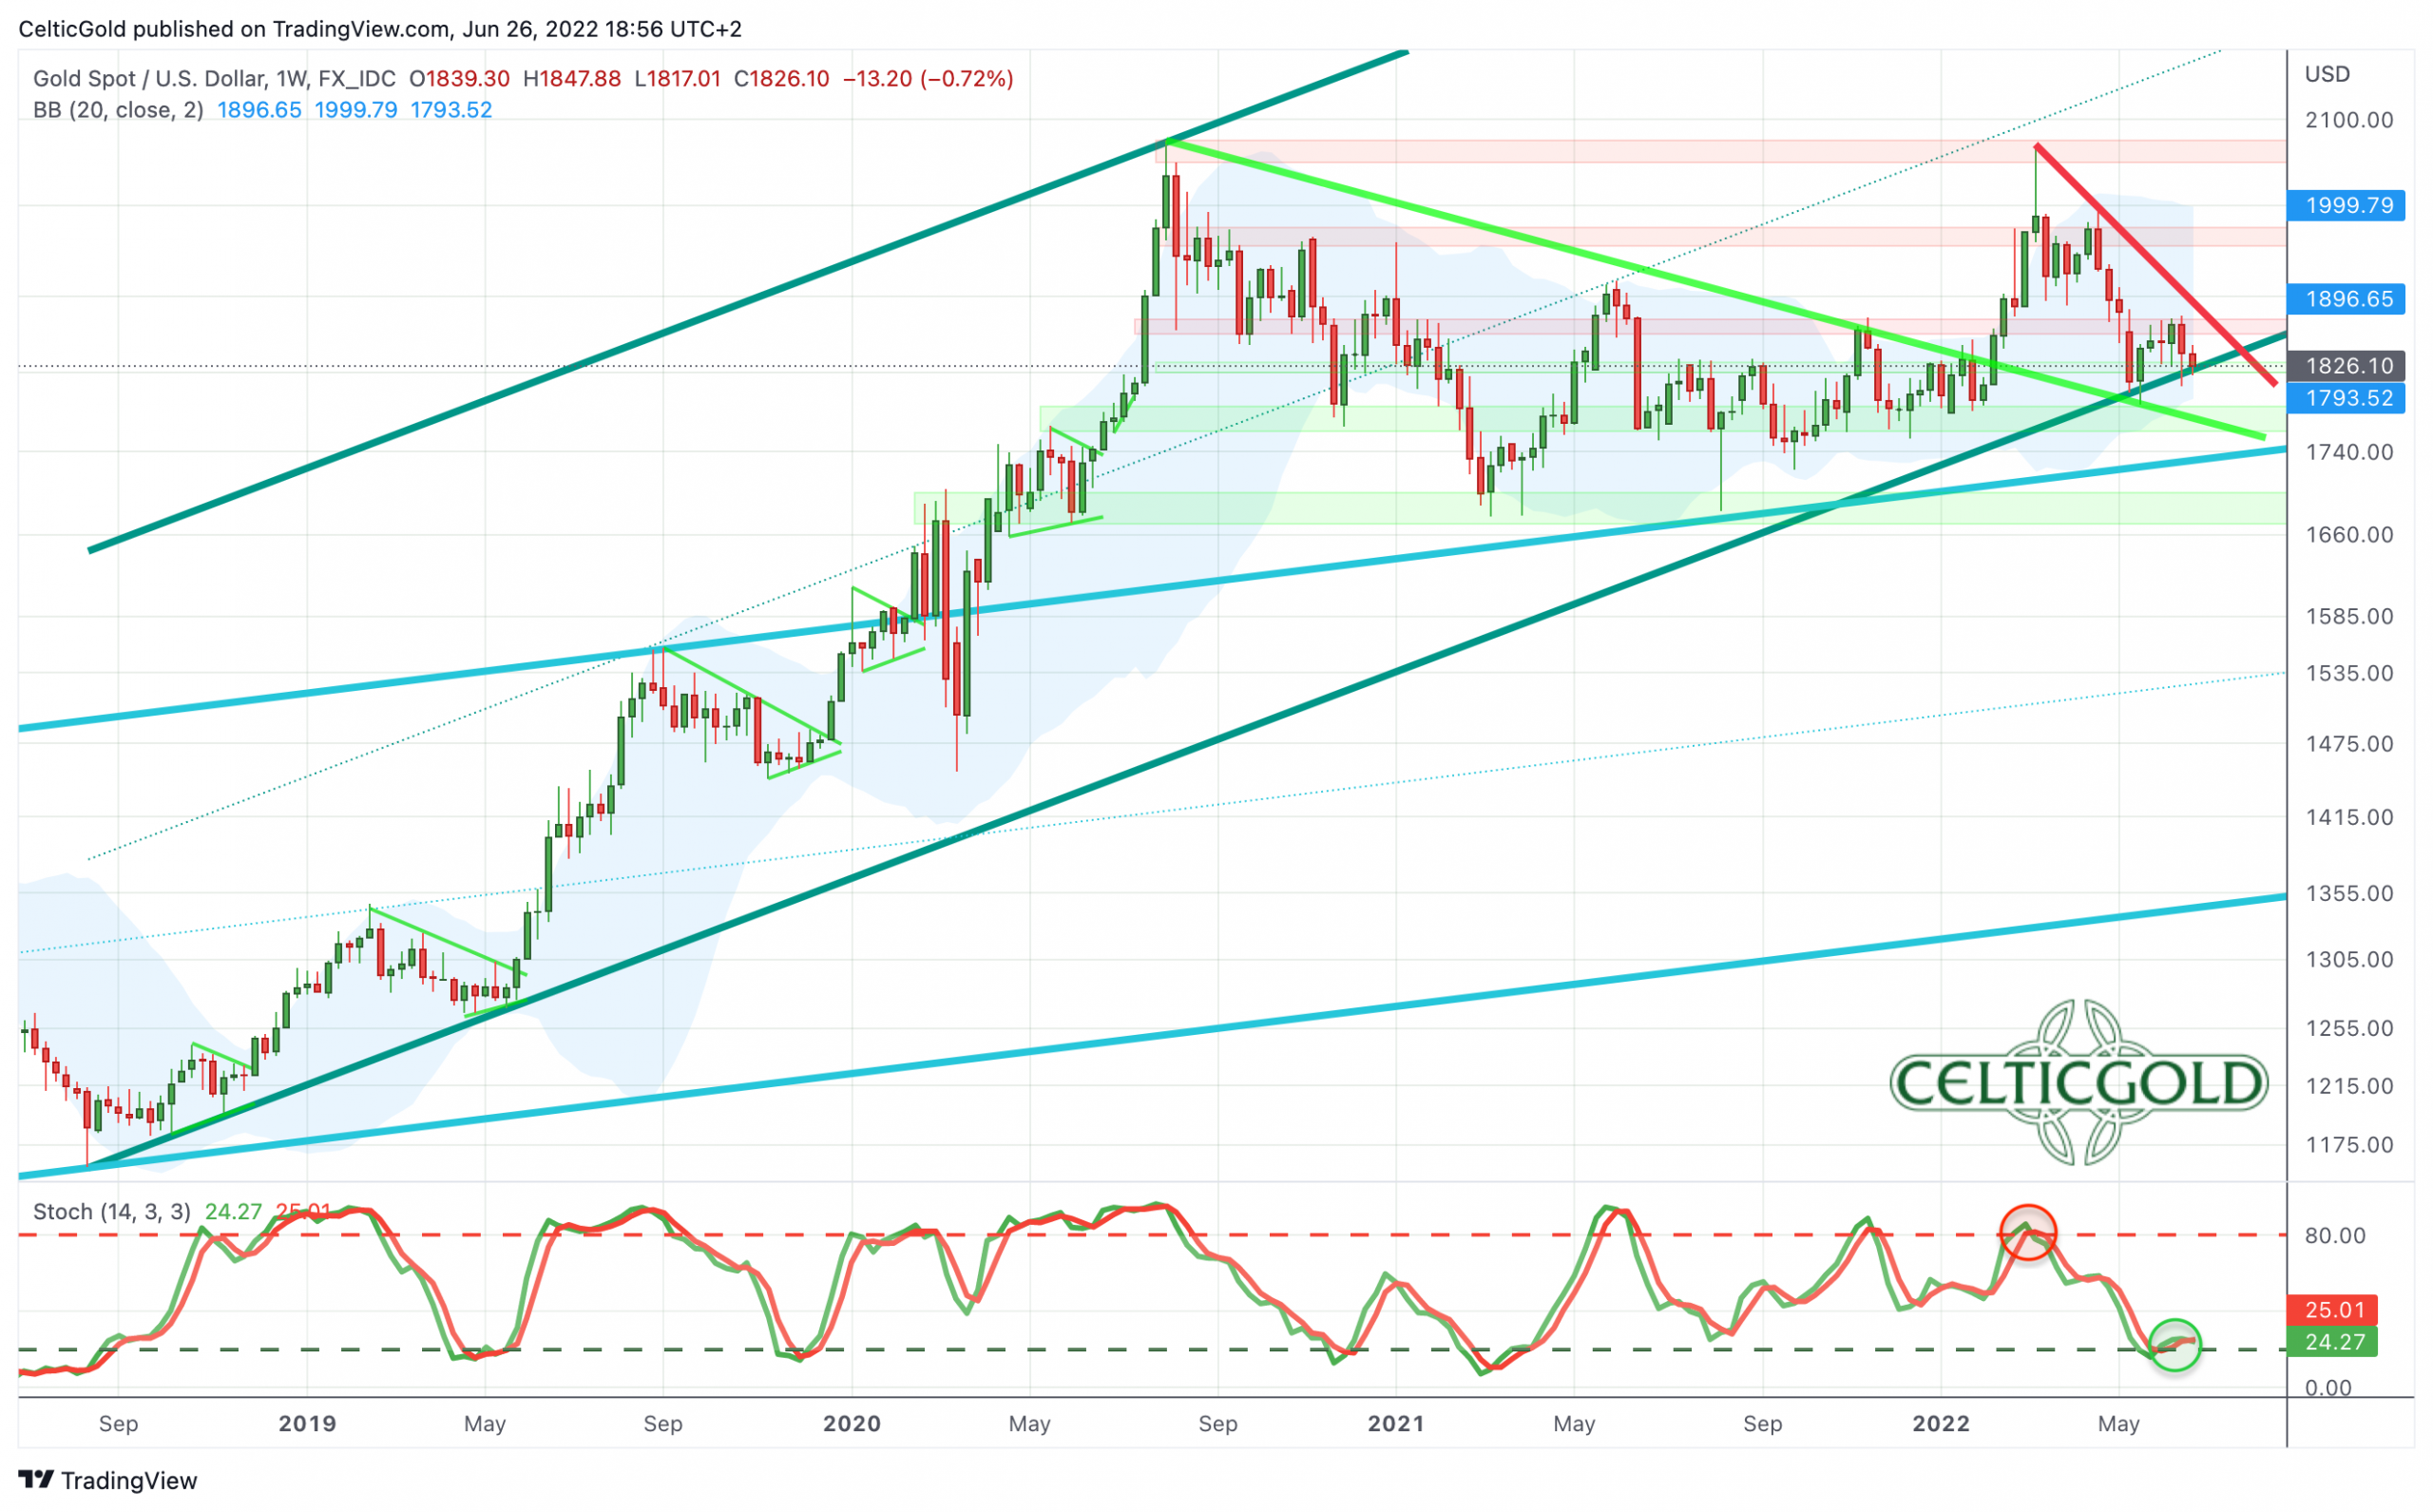 Gold in US-Dollars, weekly chart as of June 26th, 2022. Source: Tradingview. Summer doldrums for several weeks would be ideal.